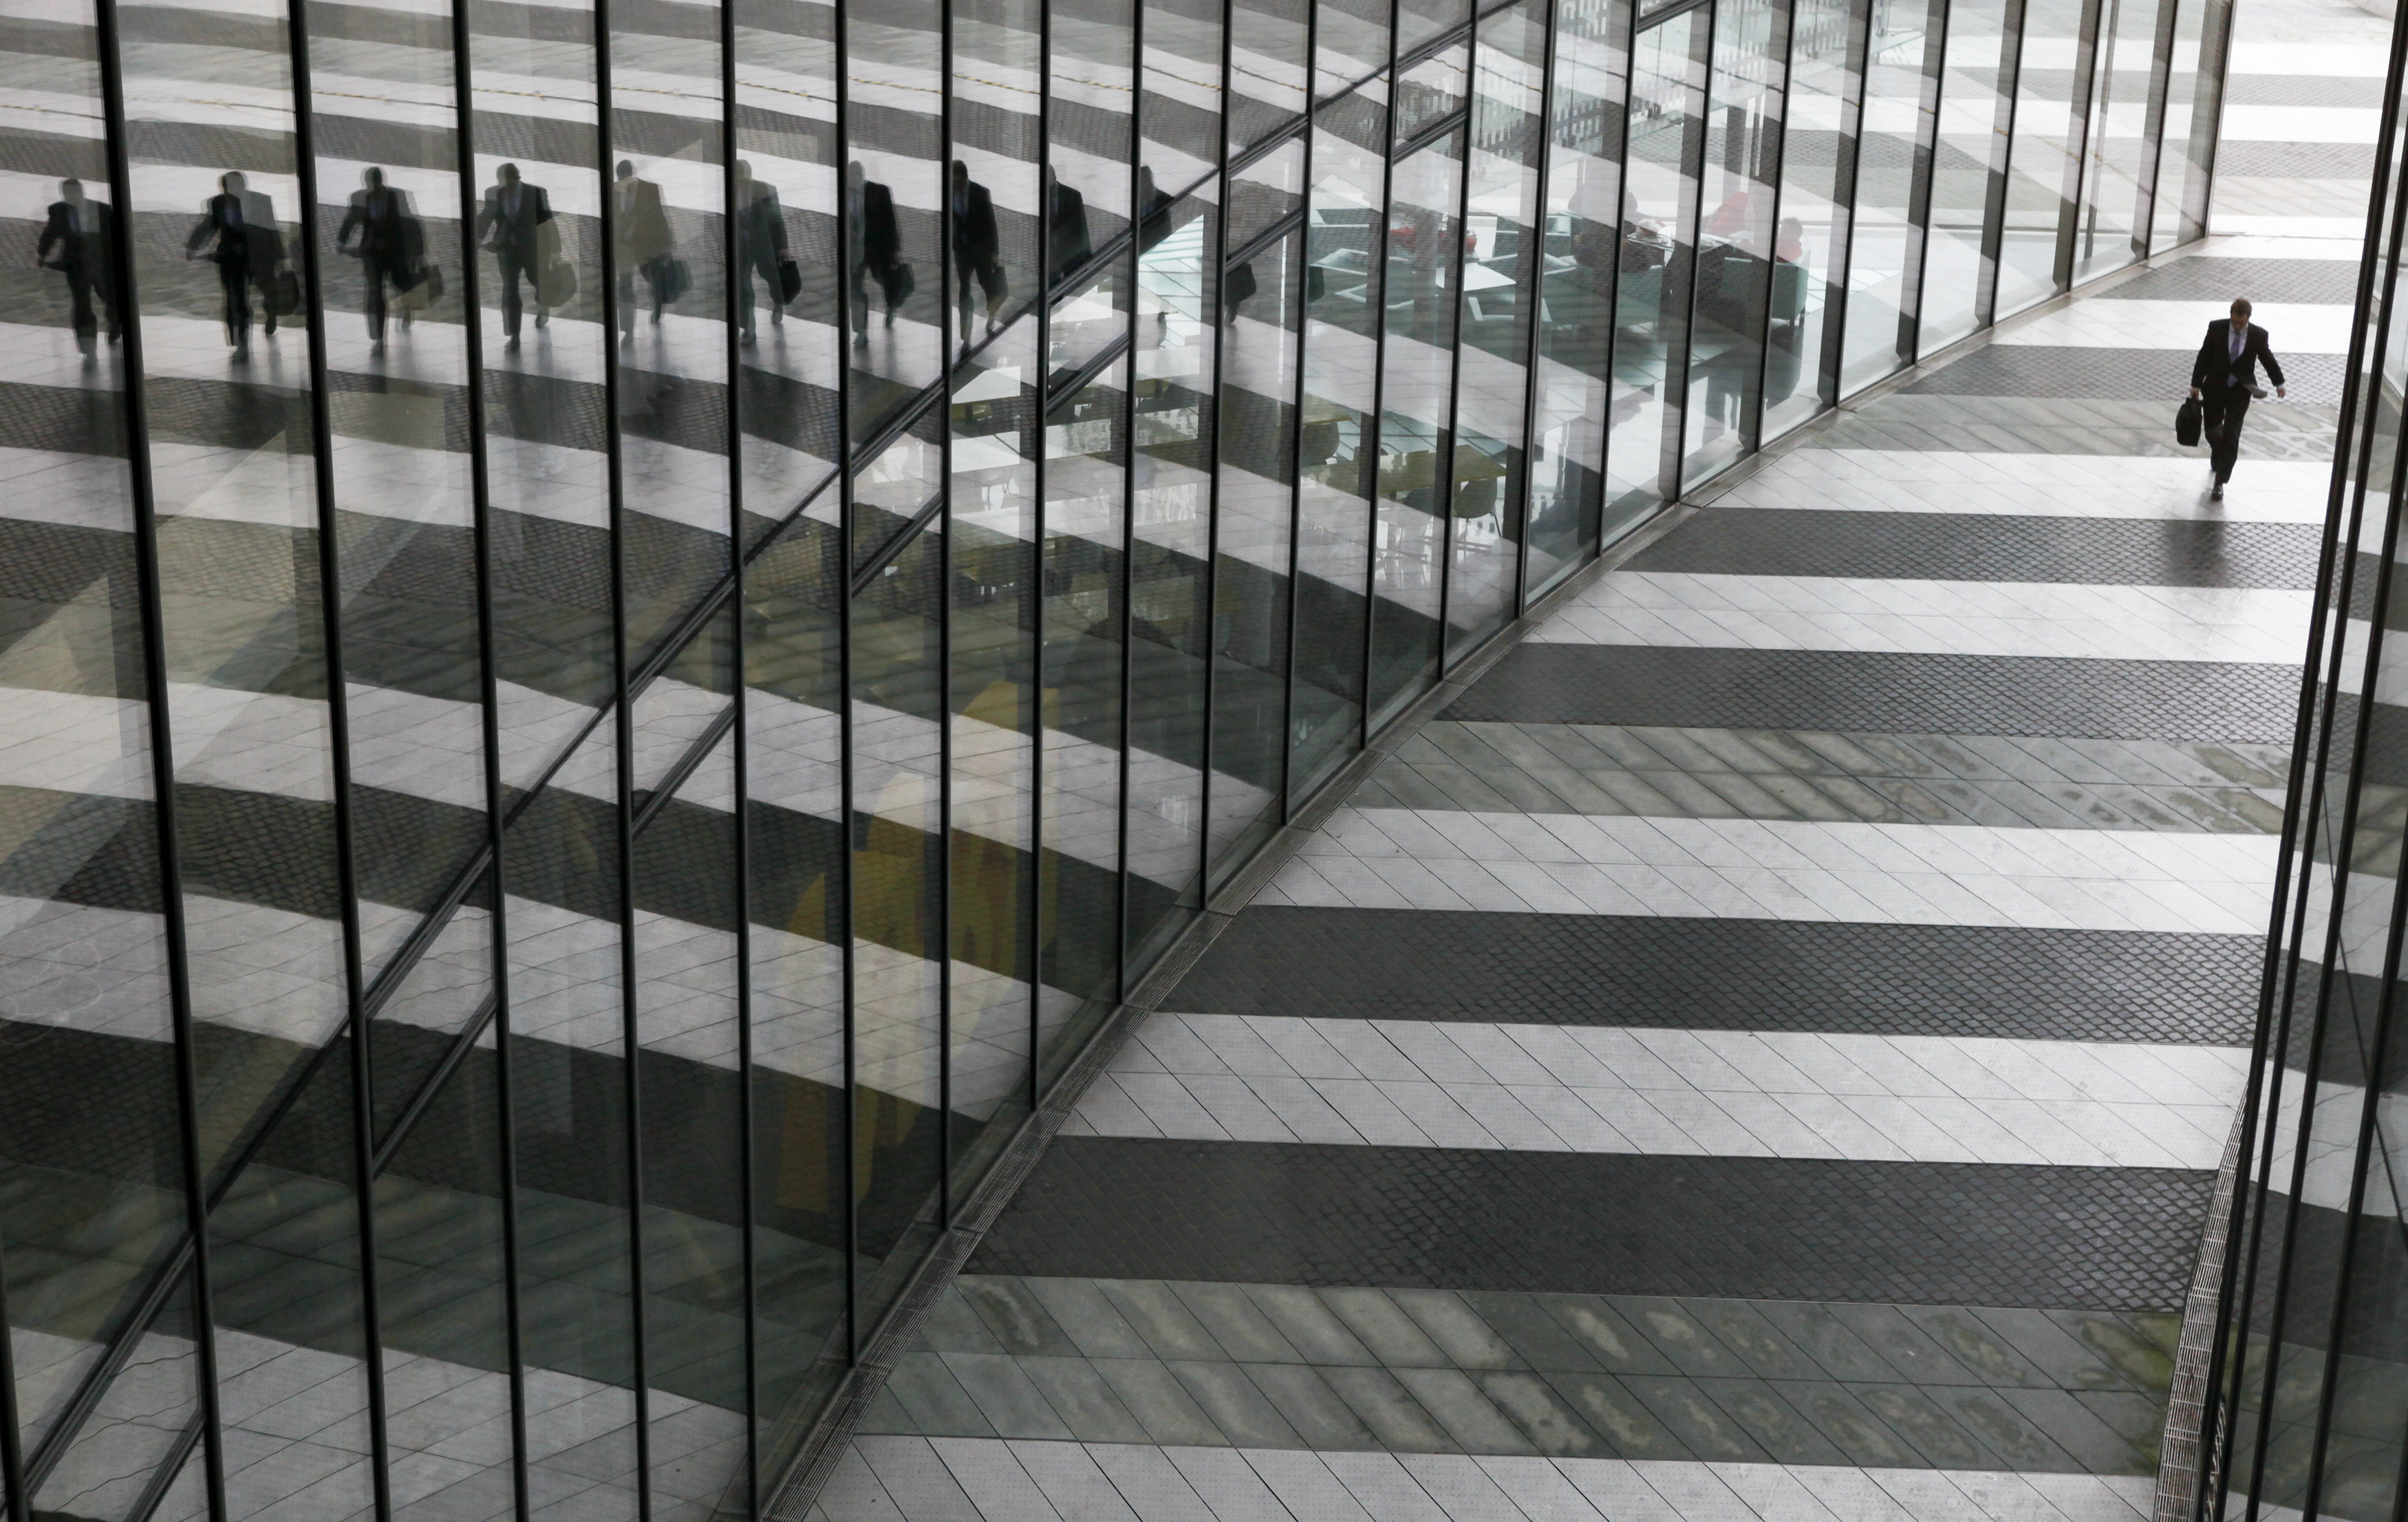 A man is reflected on the glass facade of the Bonn Post Tower in Bonn